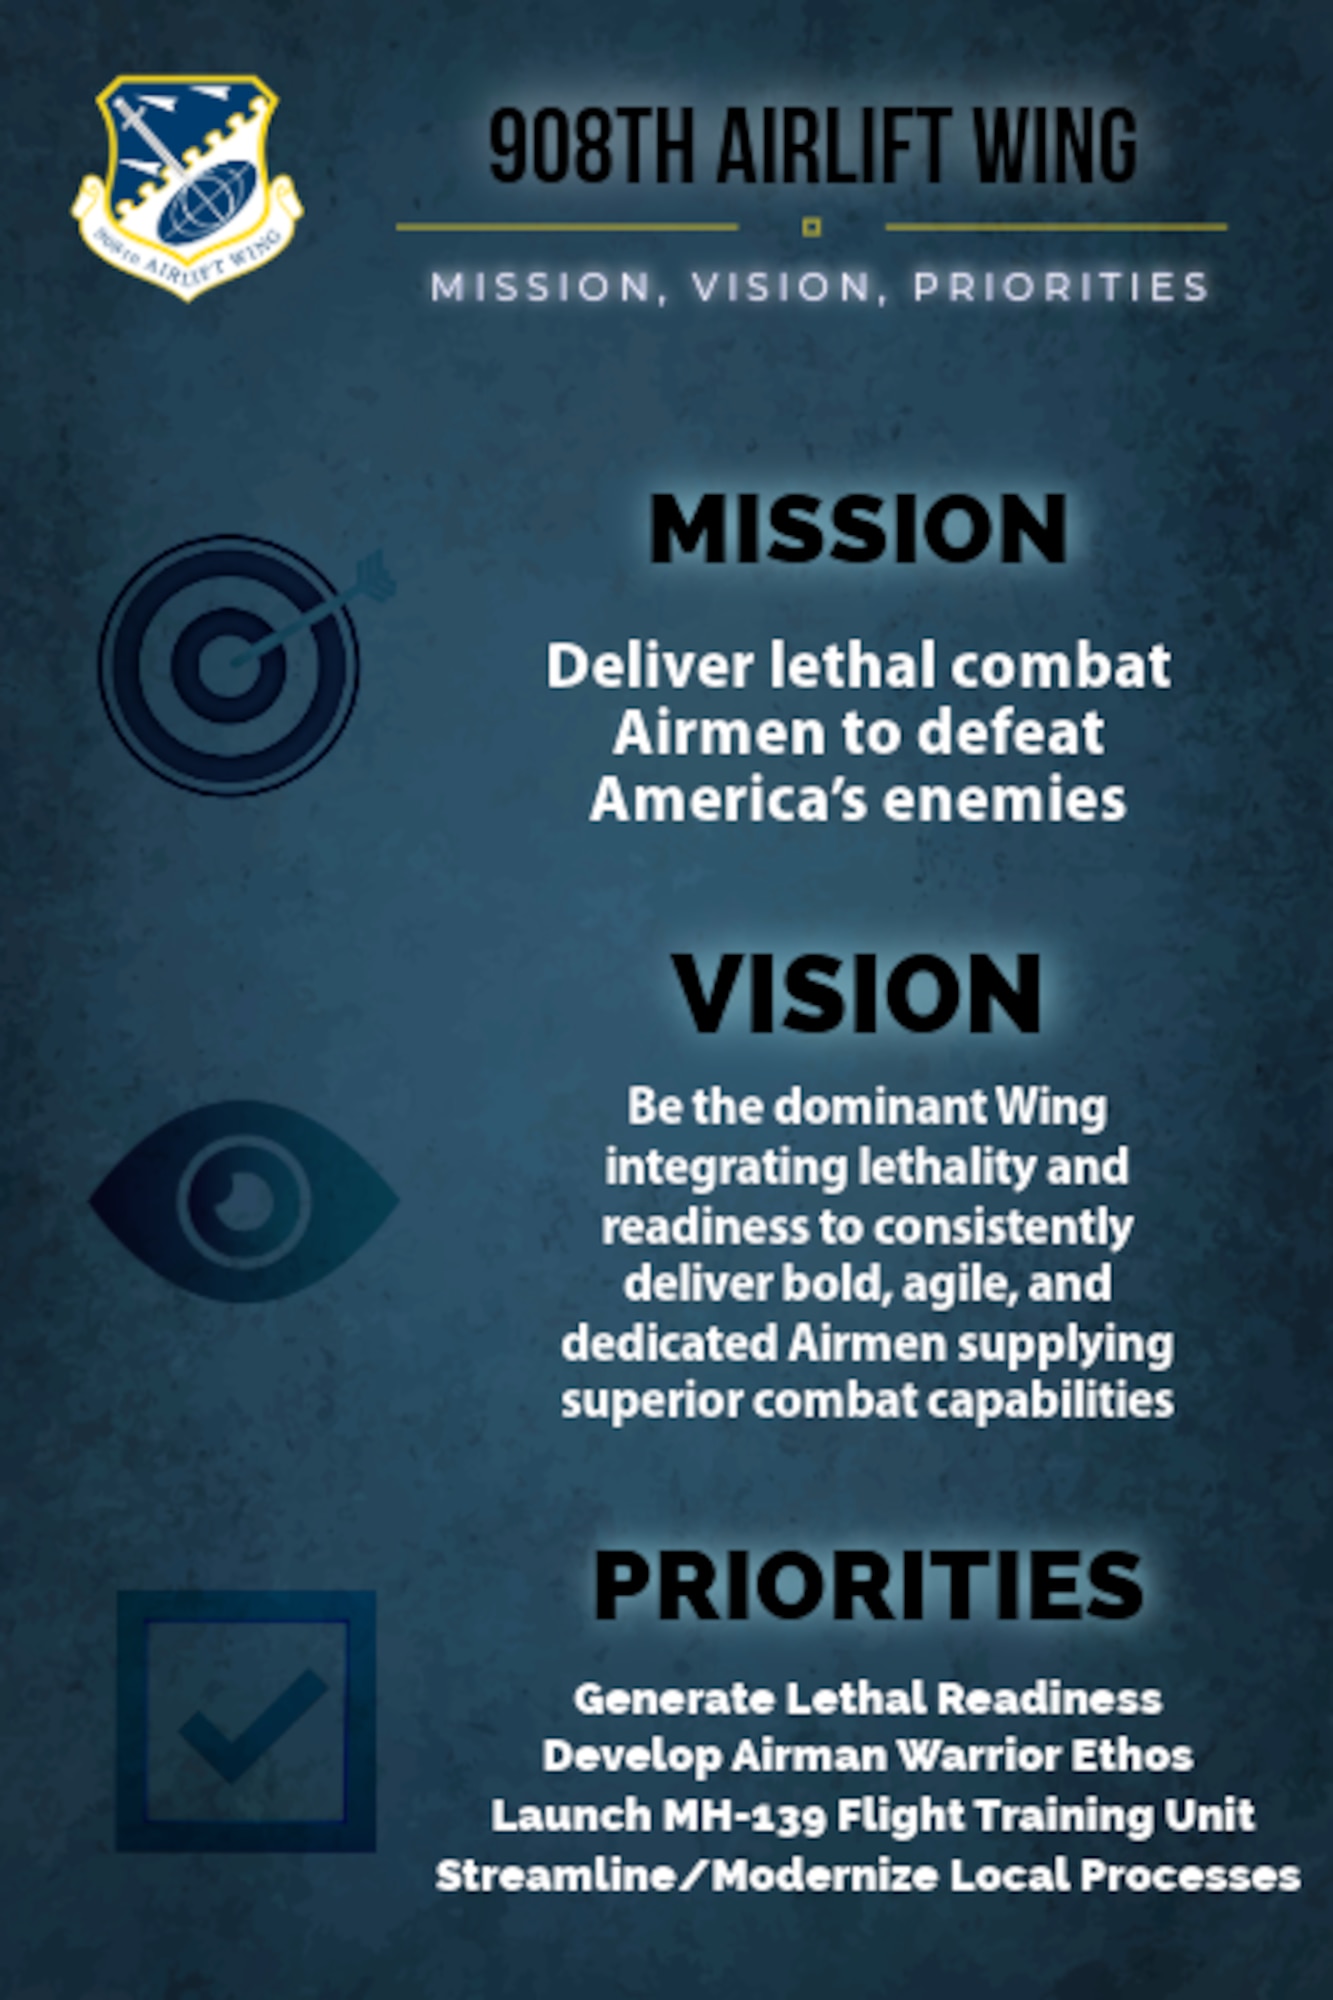 a graphic depicting the wing's new mission statement, vision statement and priorities